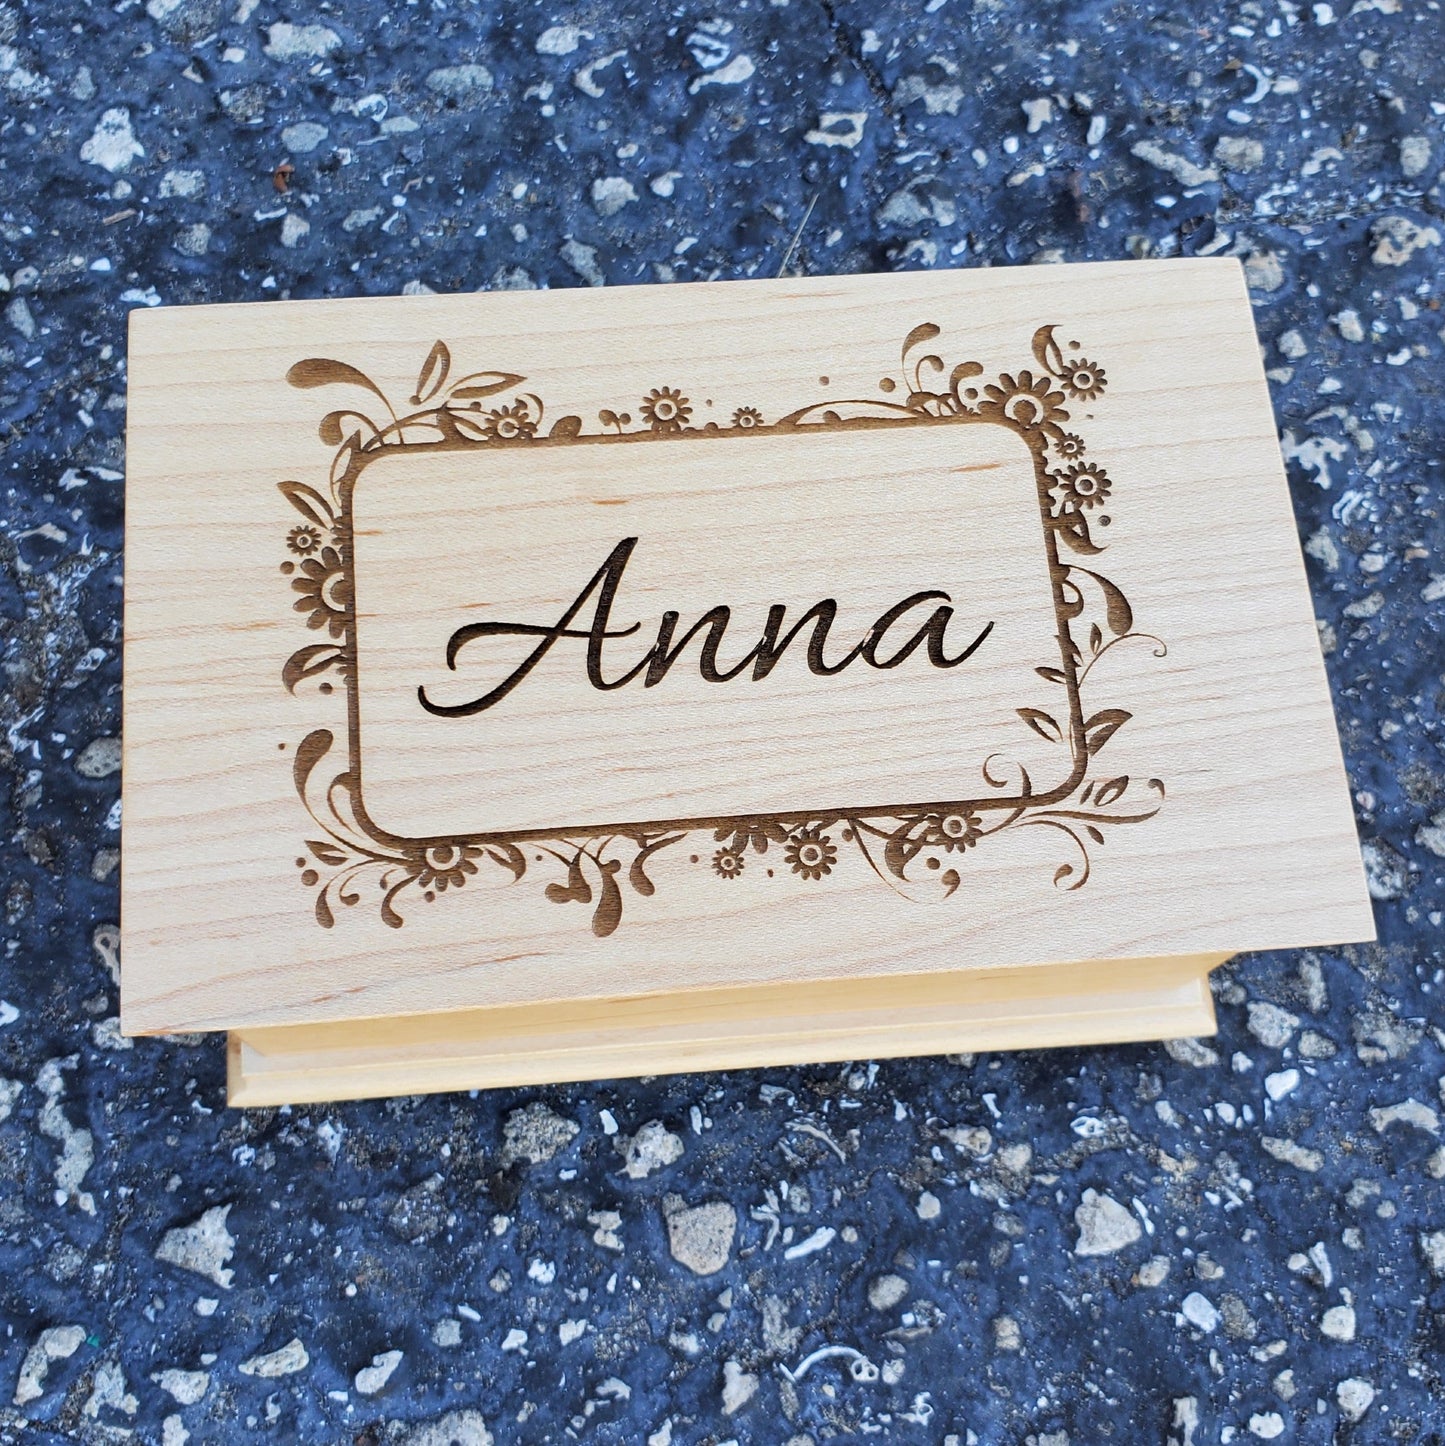 Name Jewelry Box with custom song